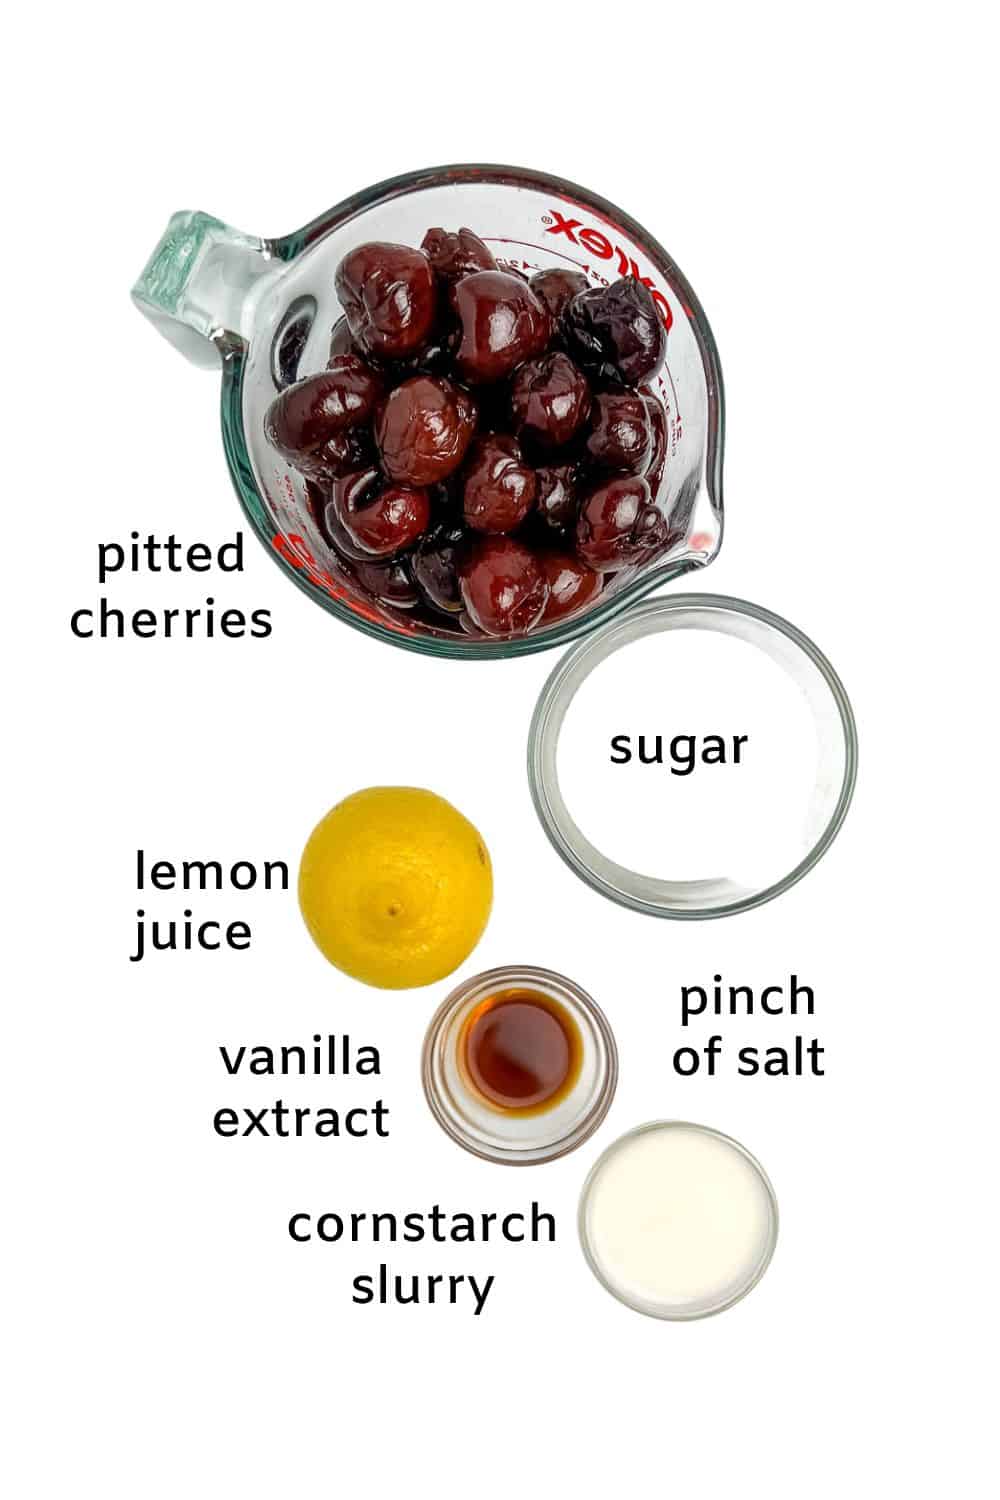 Labelled ingredients for cherry pie filling for puff pastry hand pies.